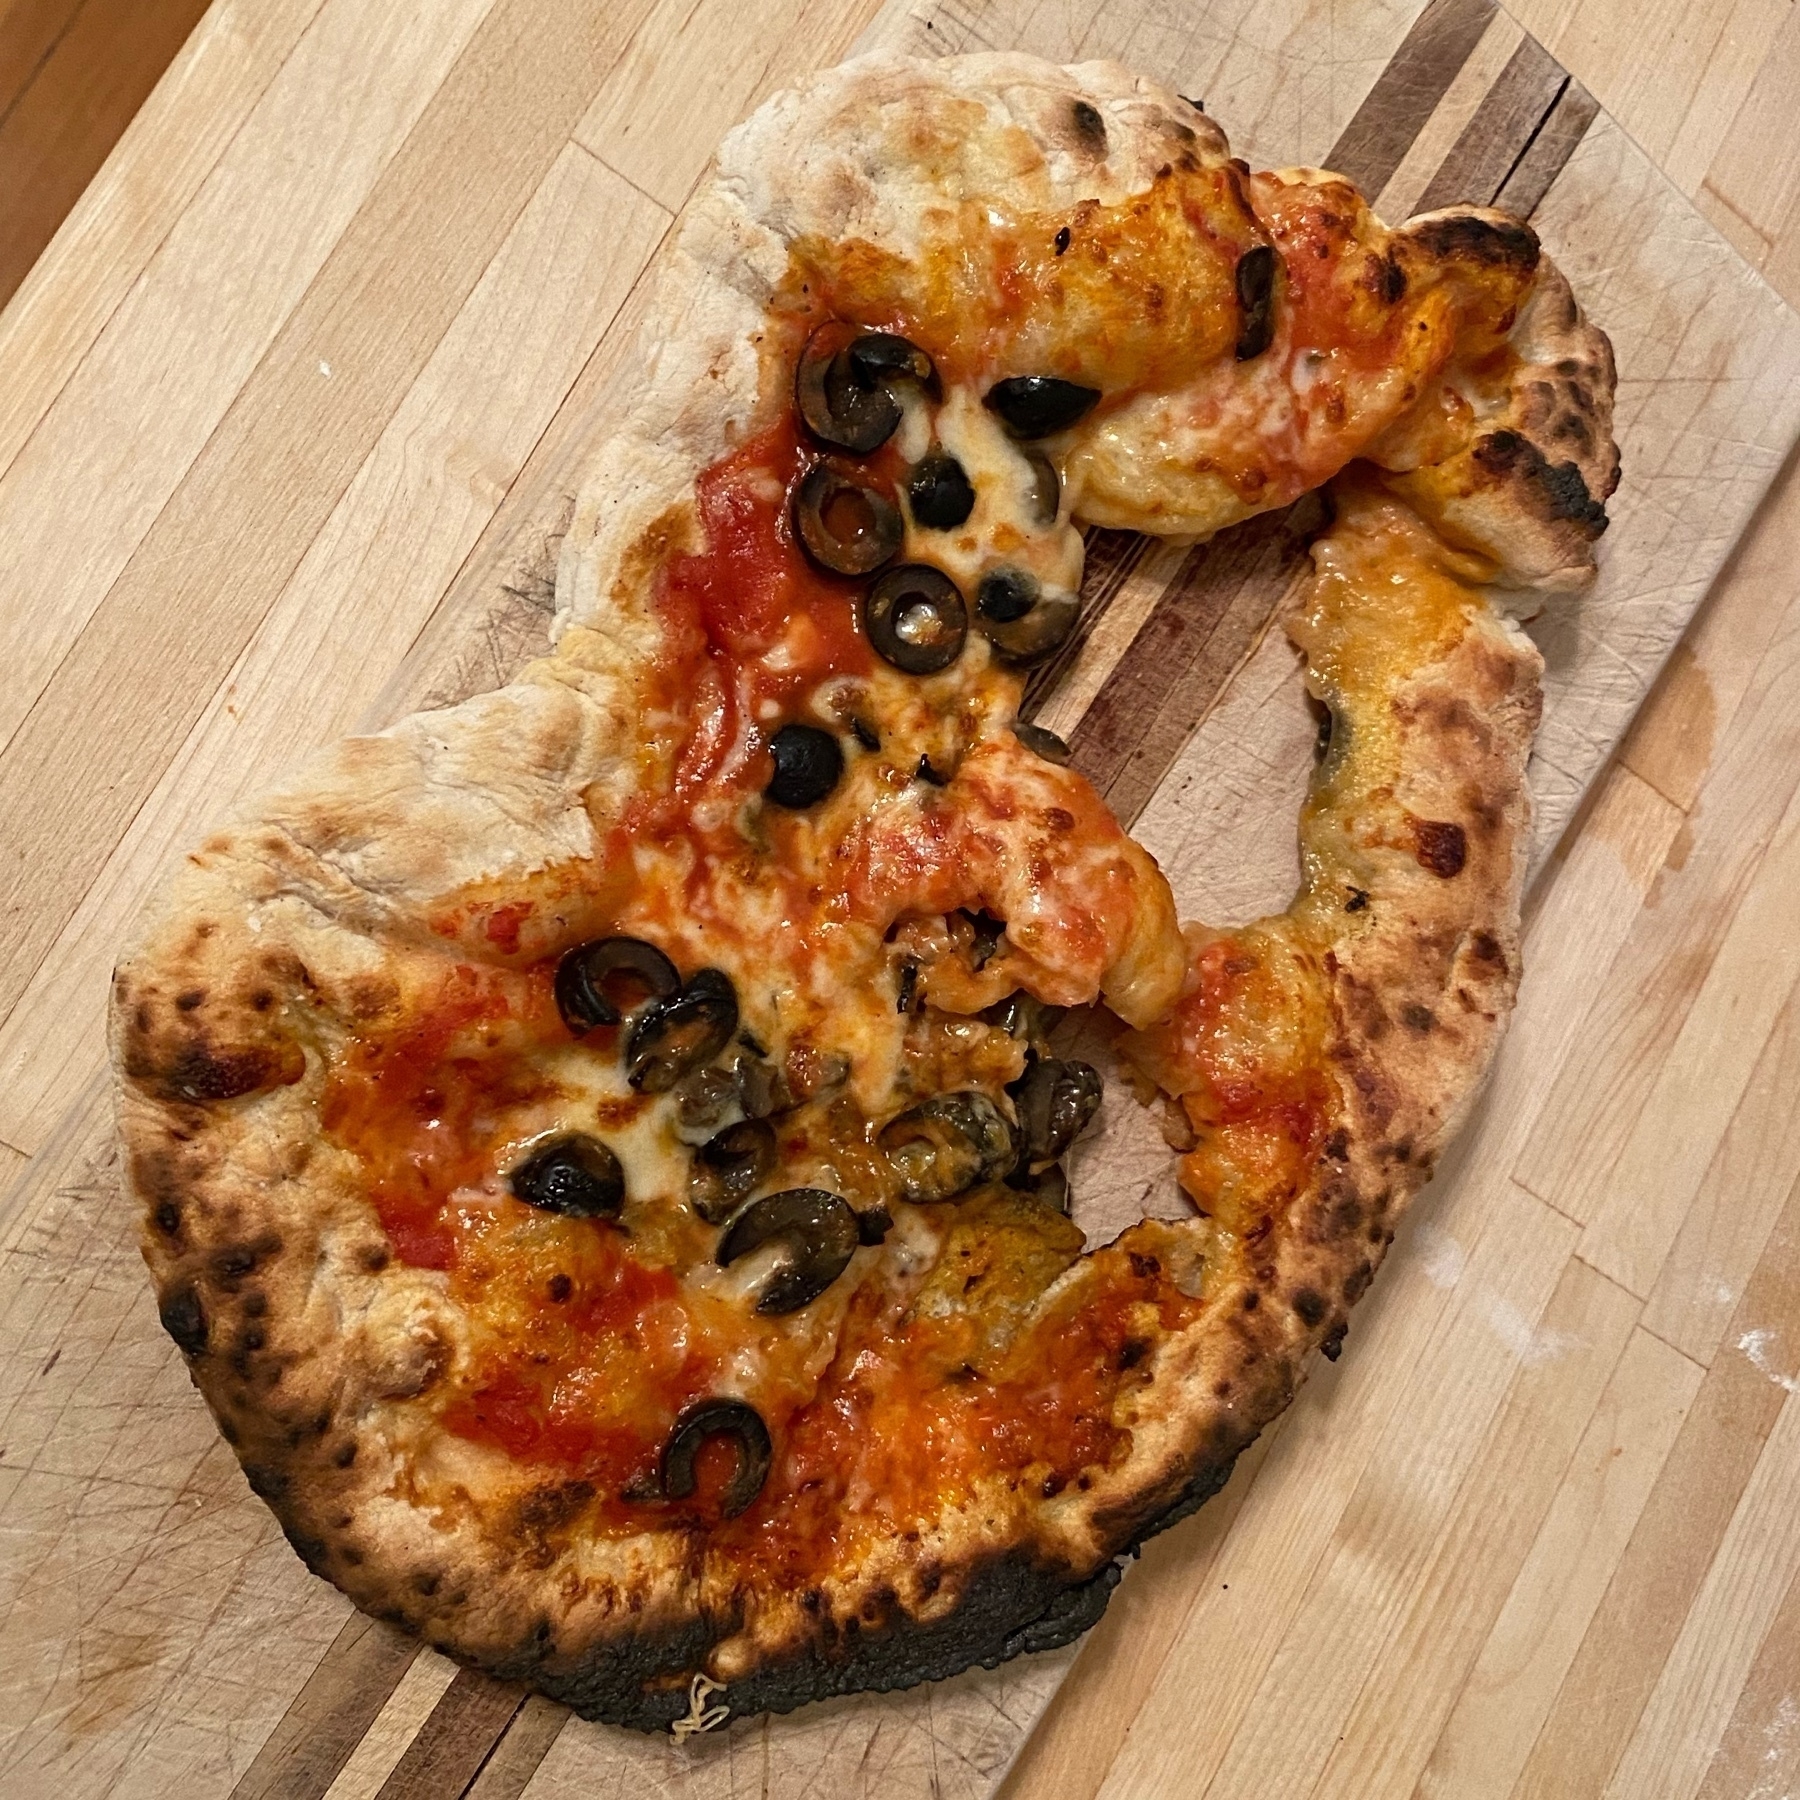 cheese and olive pizza in a non-circular shape with holes in it